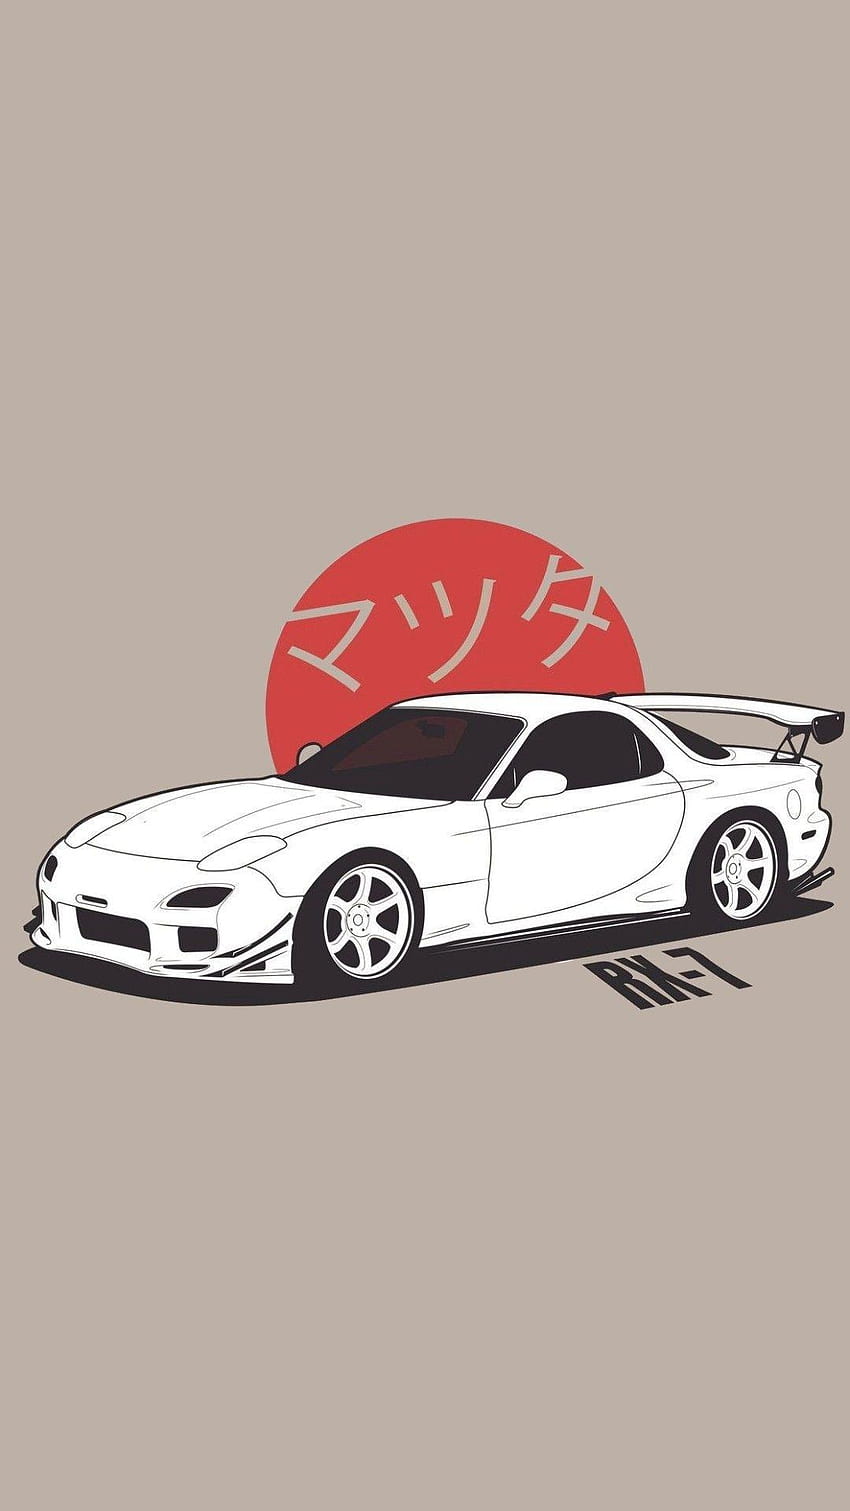 1080x1920 / 1080x1920 mazda rx7, mazda, cars, hd for Iphone 6, 7, 8  wallpaper - Coolwallpapers.me!